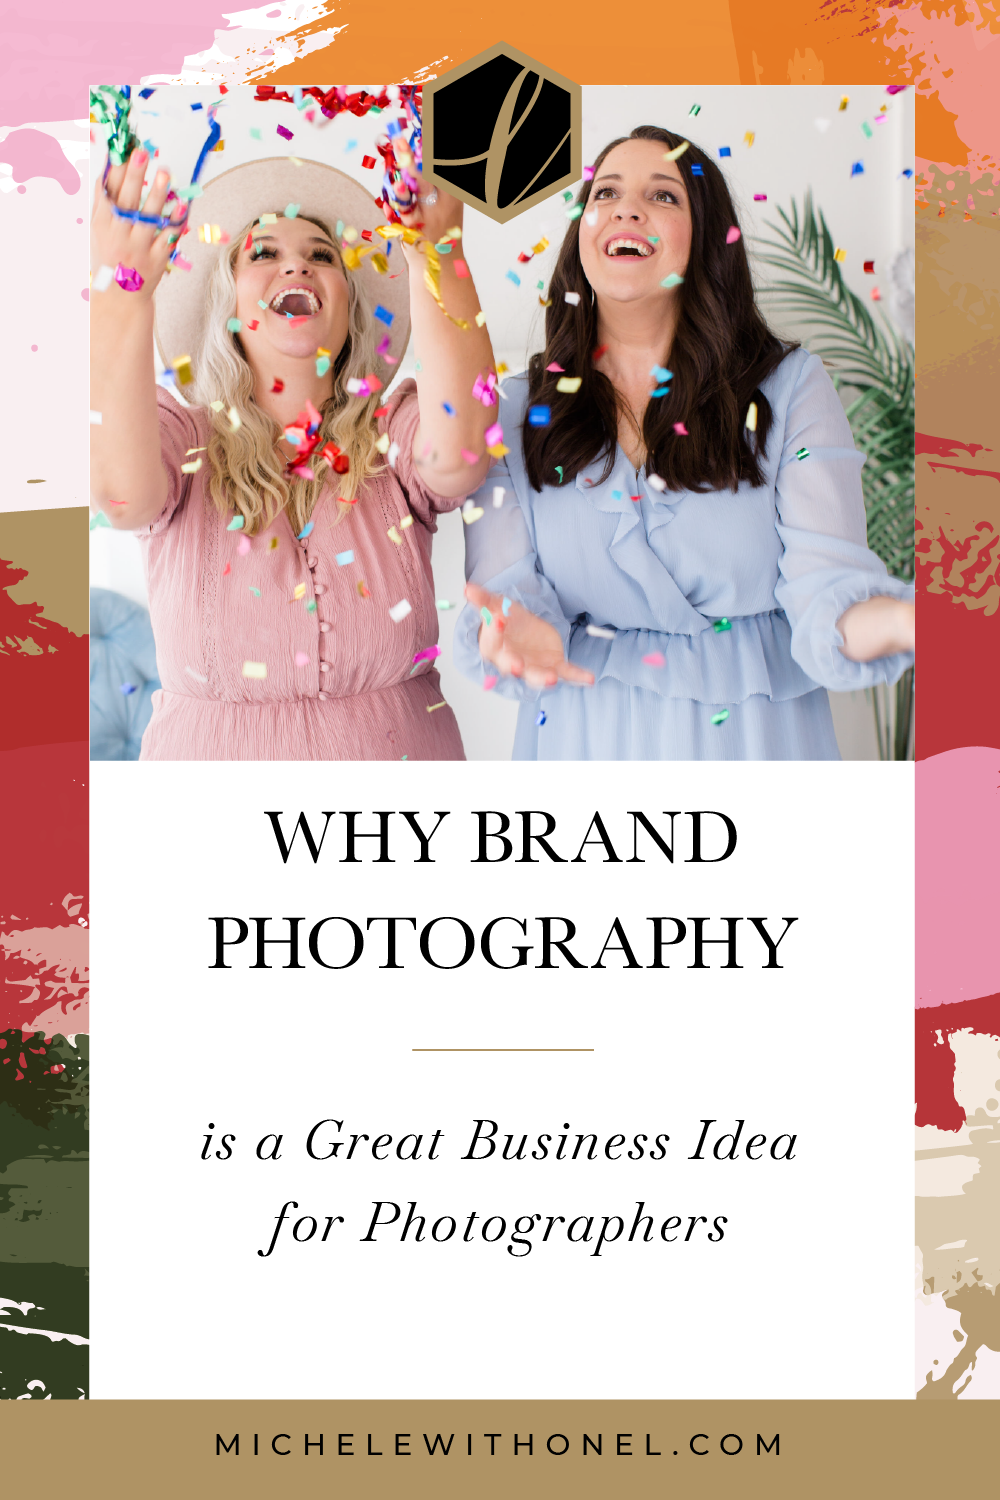 Wondering what personal brand photos can do for your business? This post is for you! Learn the purpose of a personal brand photoshoot and why every entrepreneur needs one—including headshot photography, lifestyle branding, and personal branding photography. #branding #headshots #photography #business